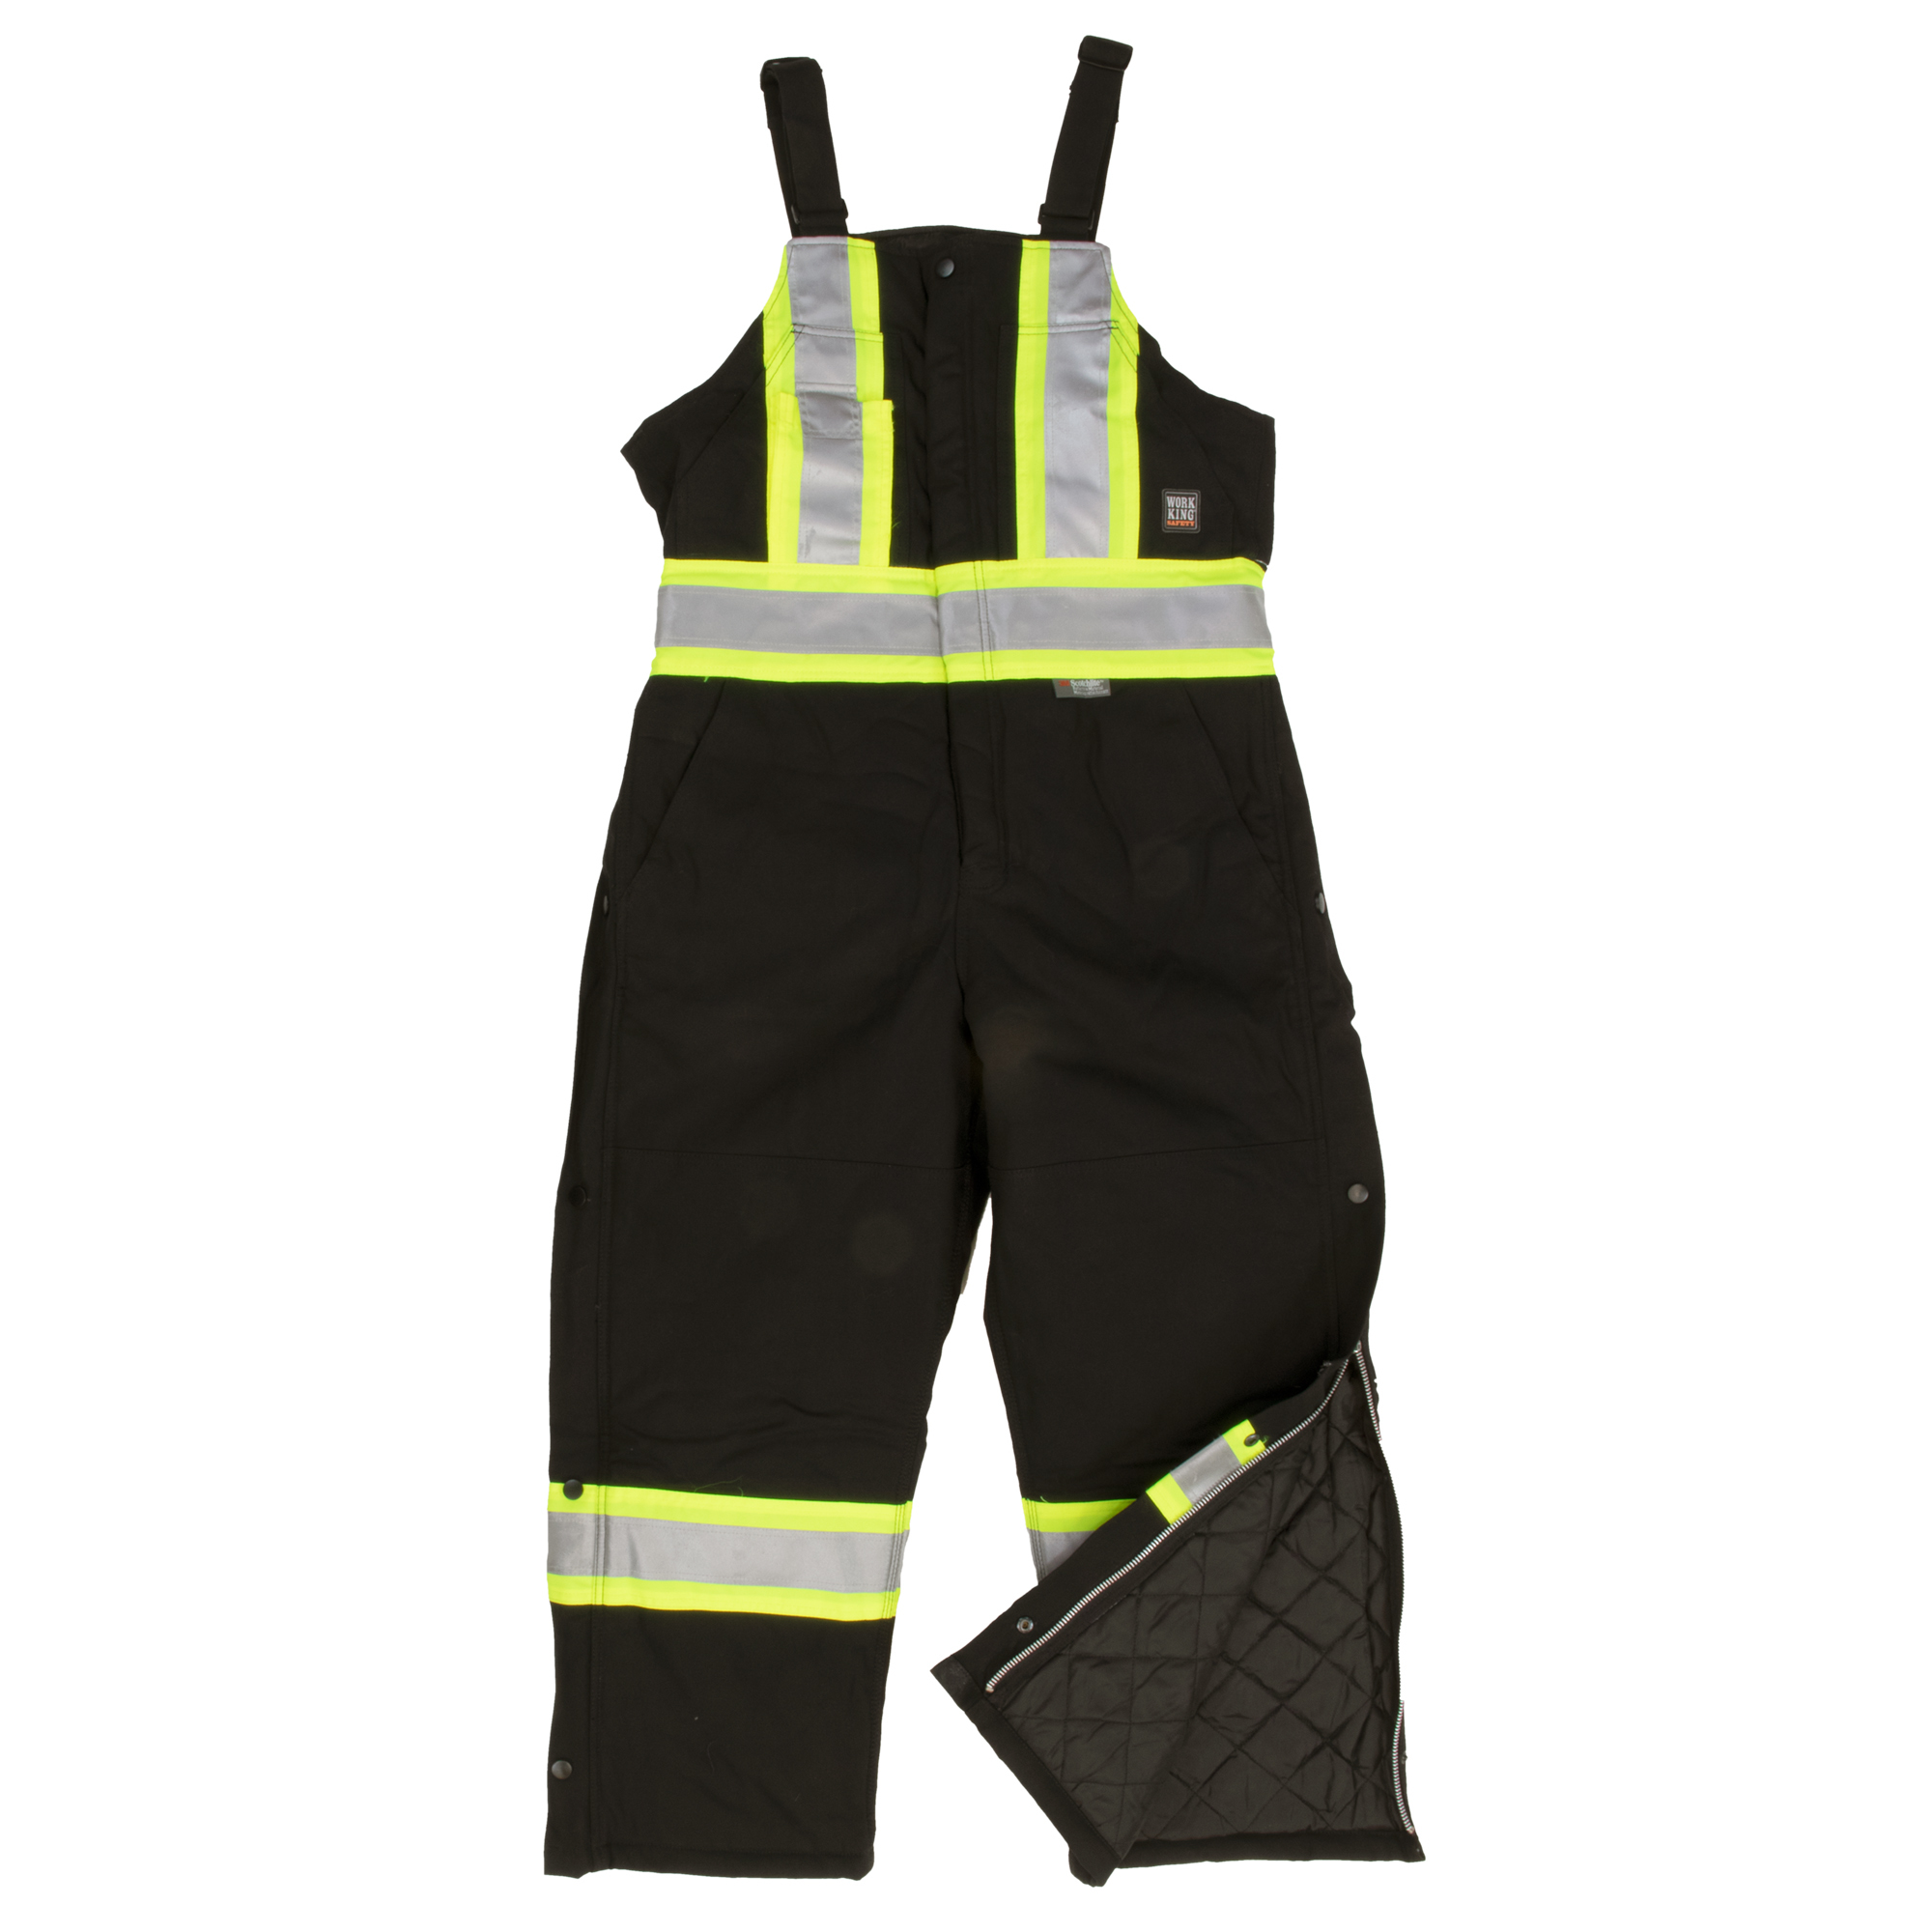 Tough Duck, Insulated Safety Overall, Size 2XL, Color Black, Model S75721